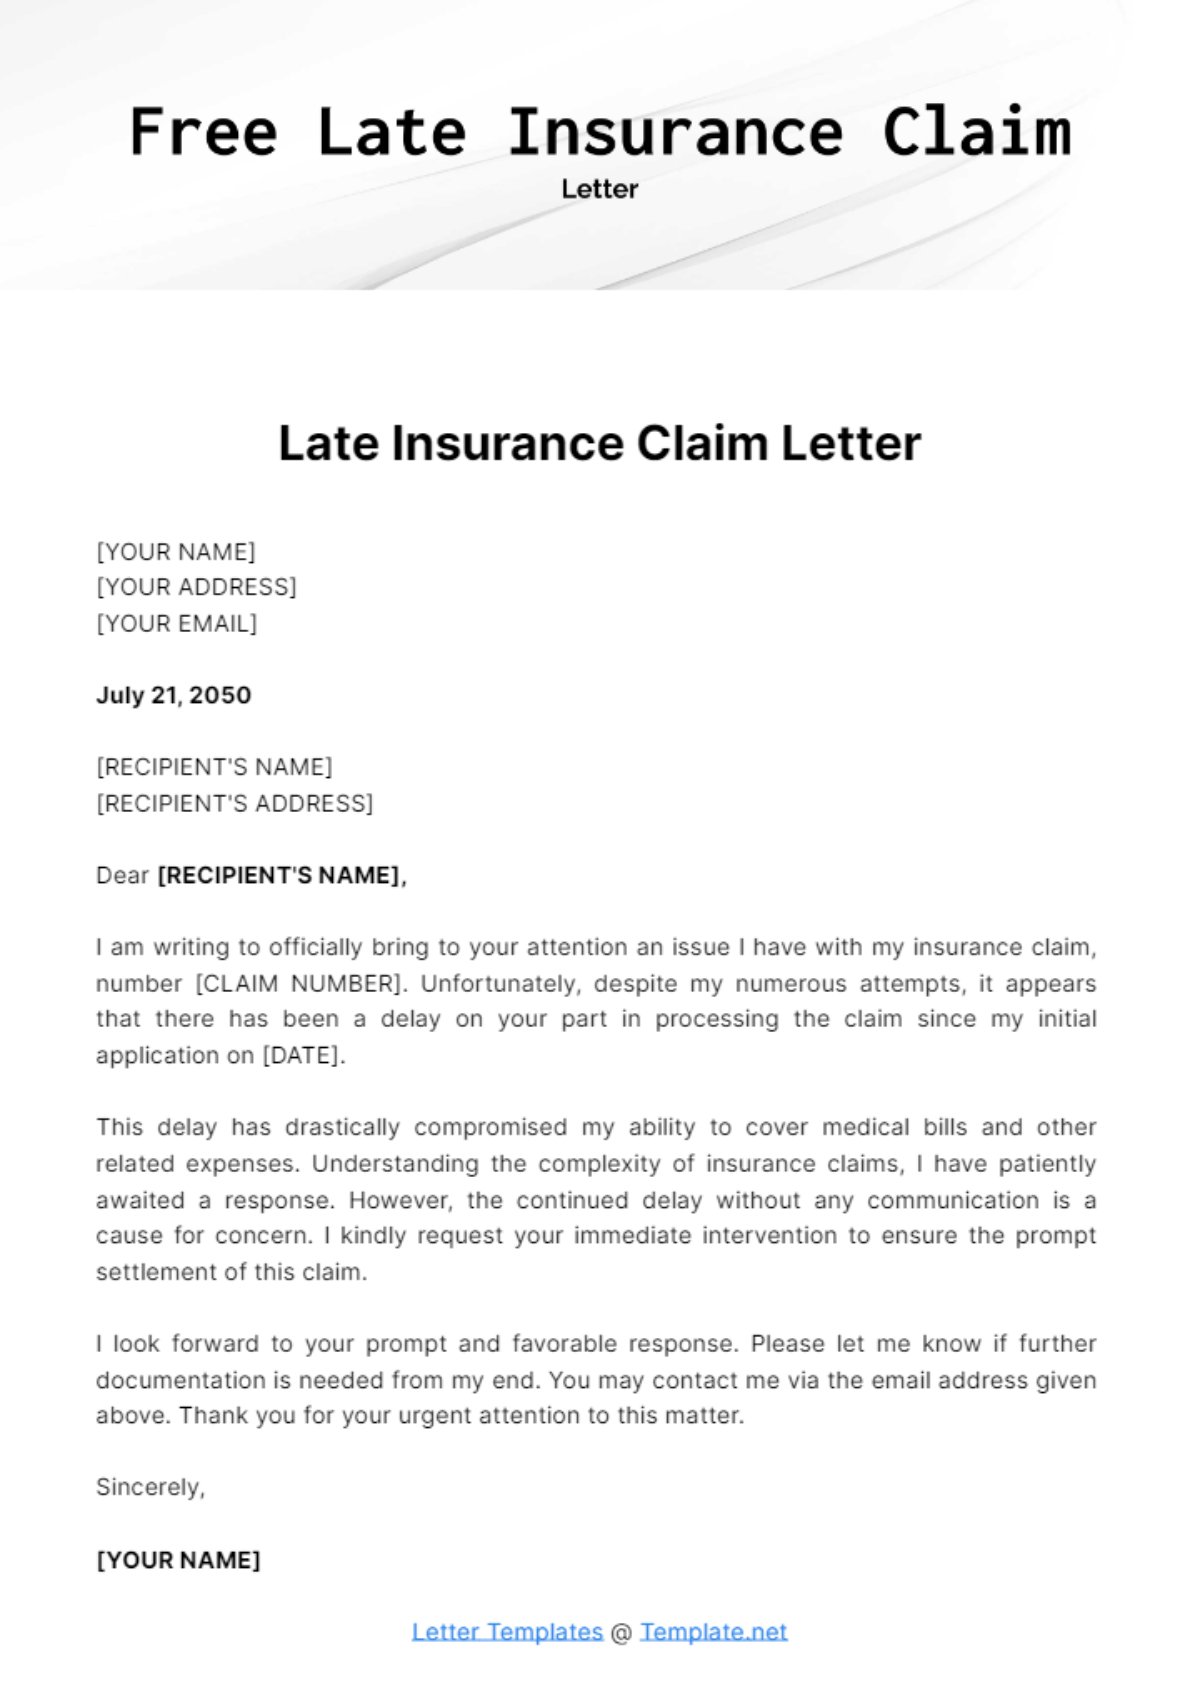 Free Late Insurance Claim Letter Template